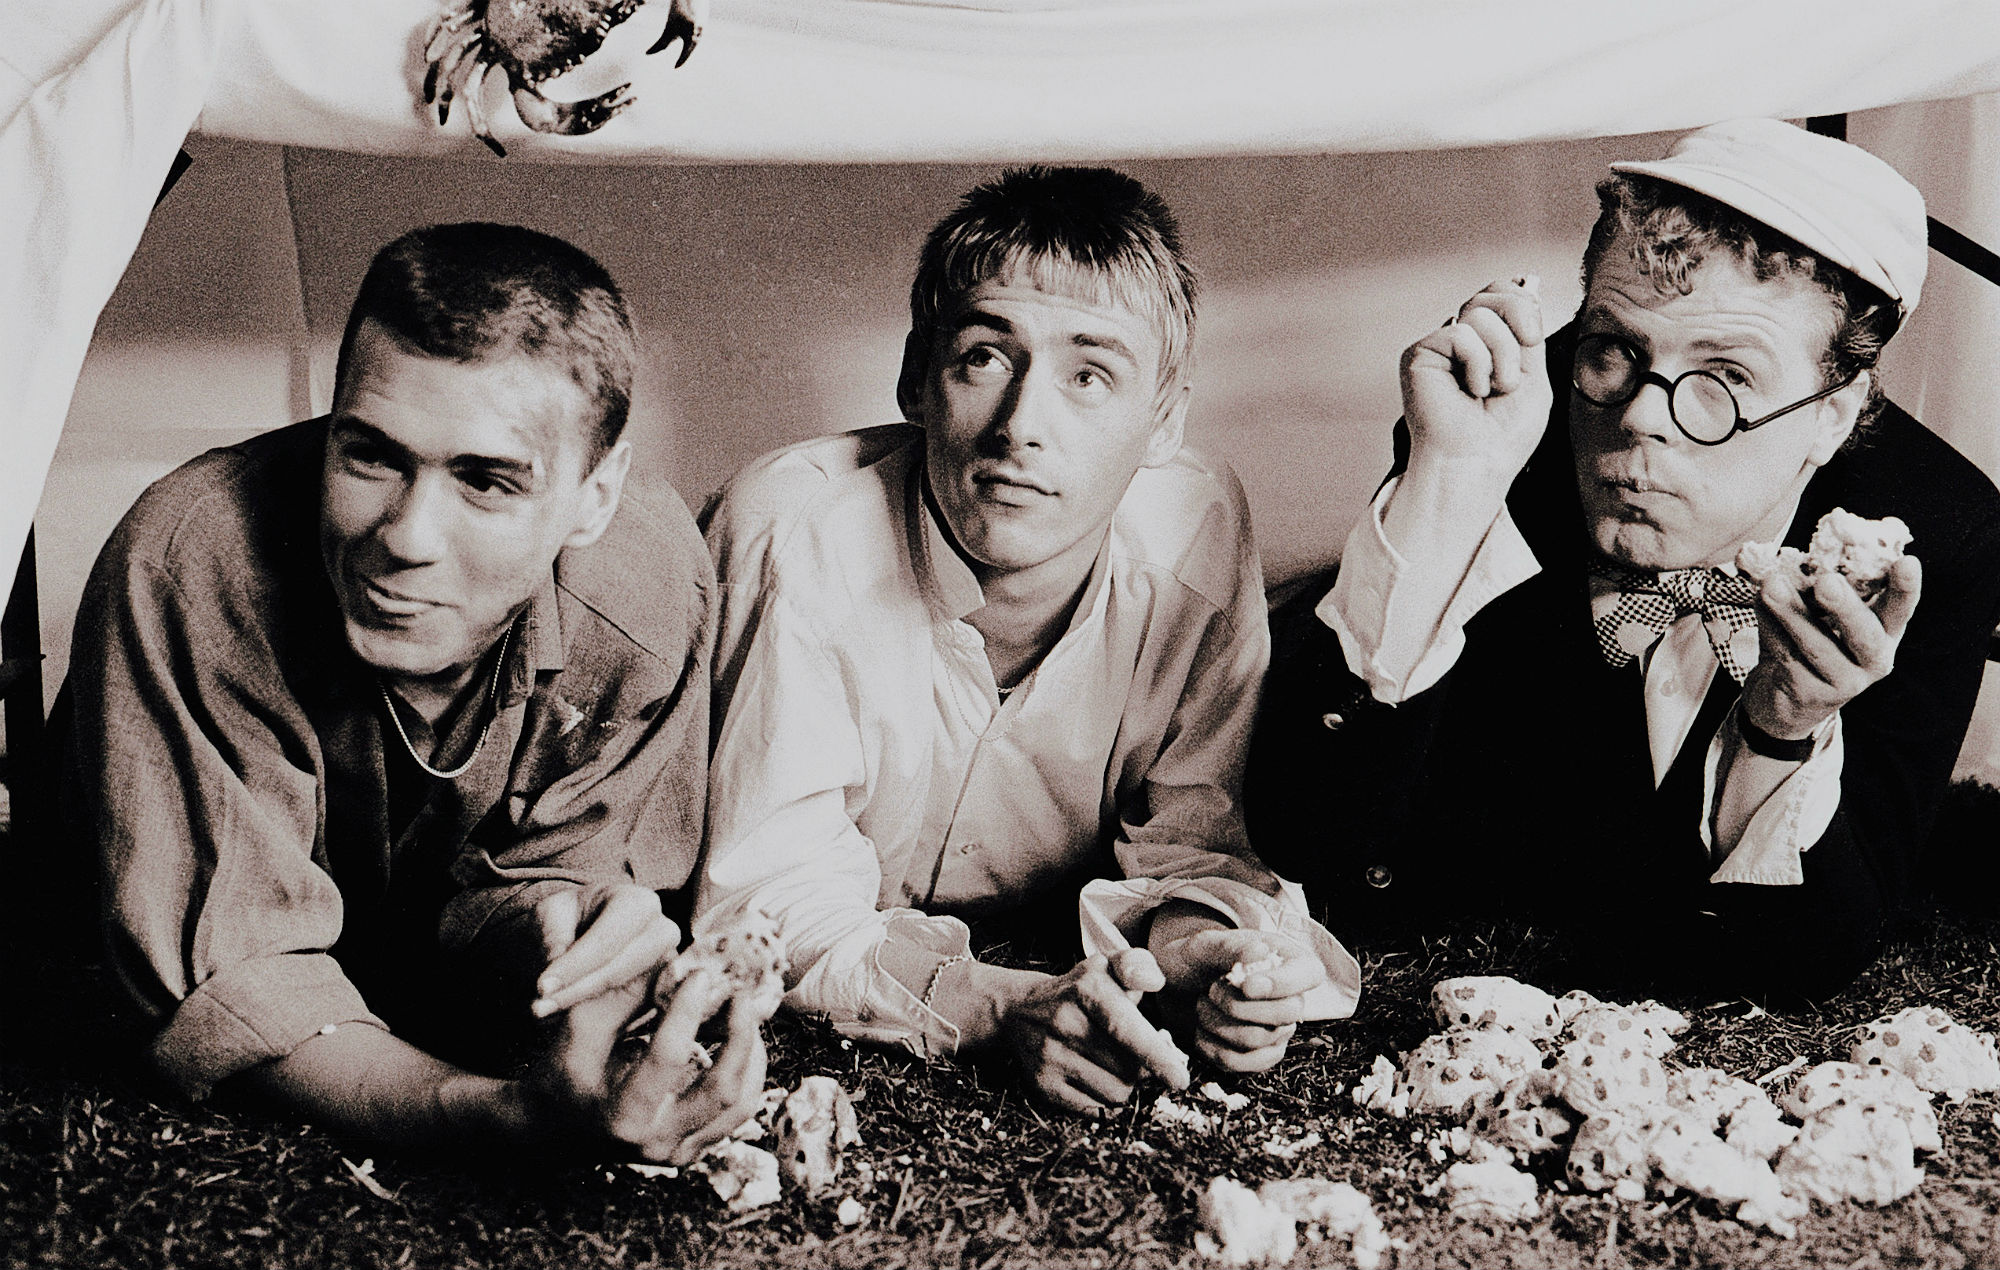 Steve White looks back on the legacy of The Style Council – and having a brother in Oasis